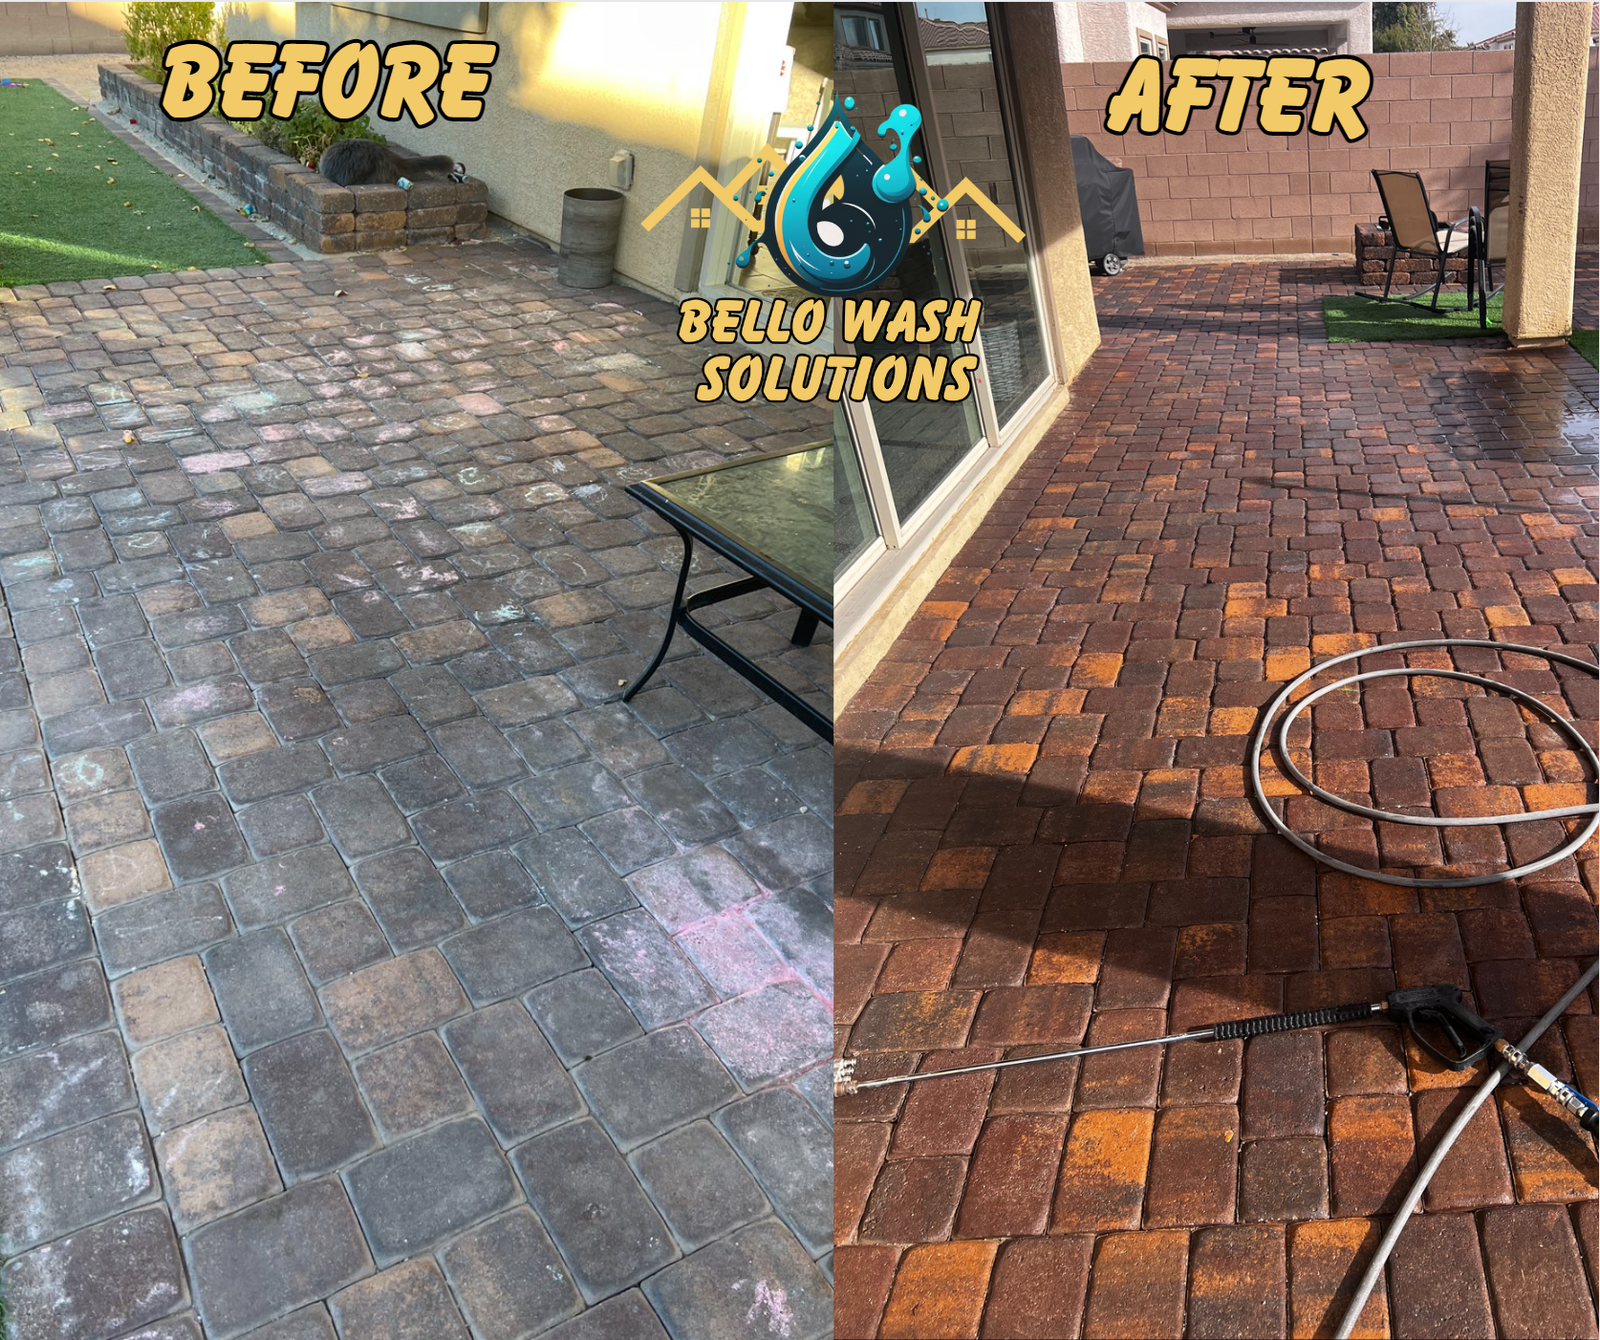 Bello Wash Solutions - Paver Cleaning in Las Vegas